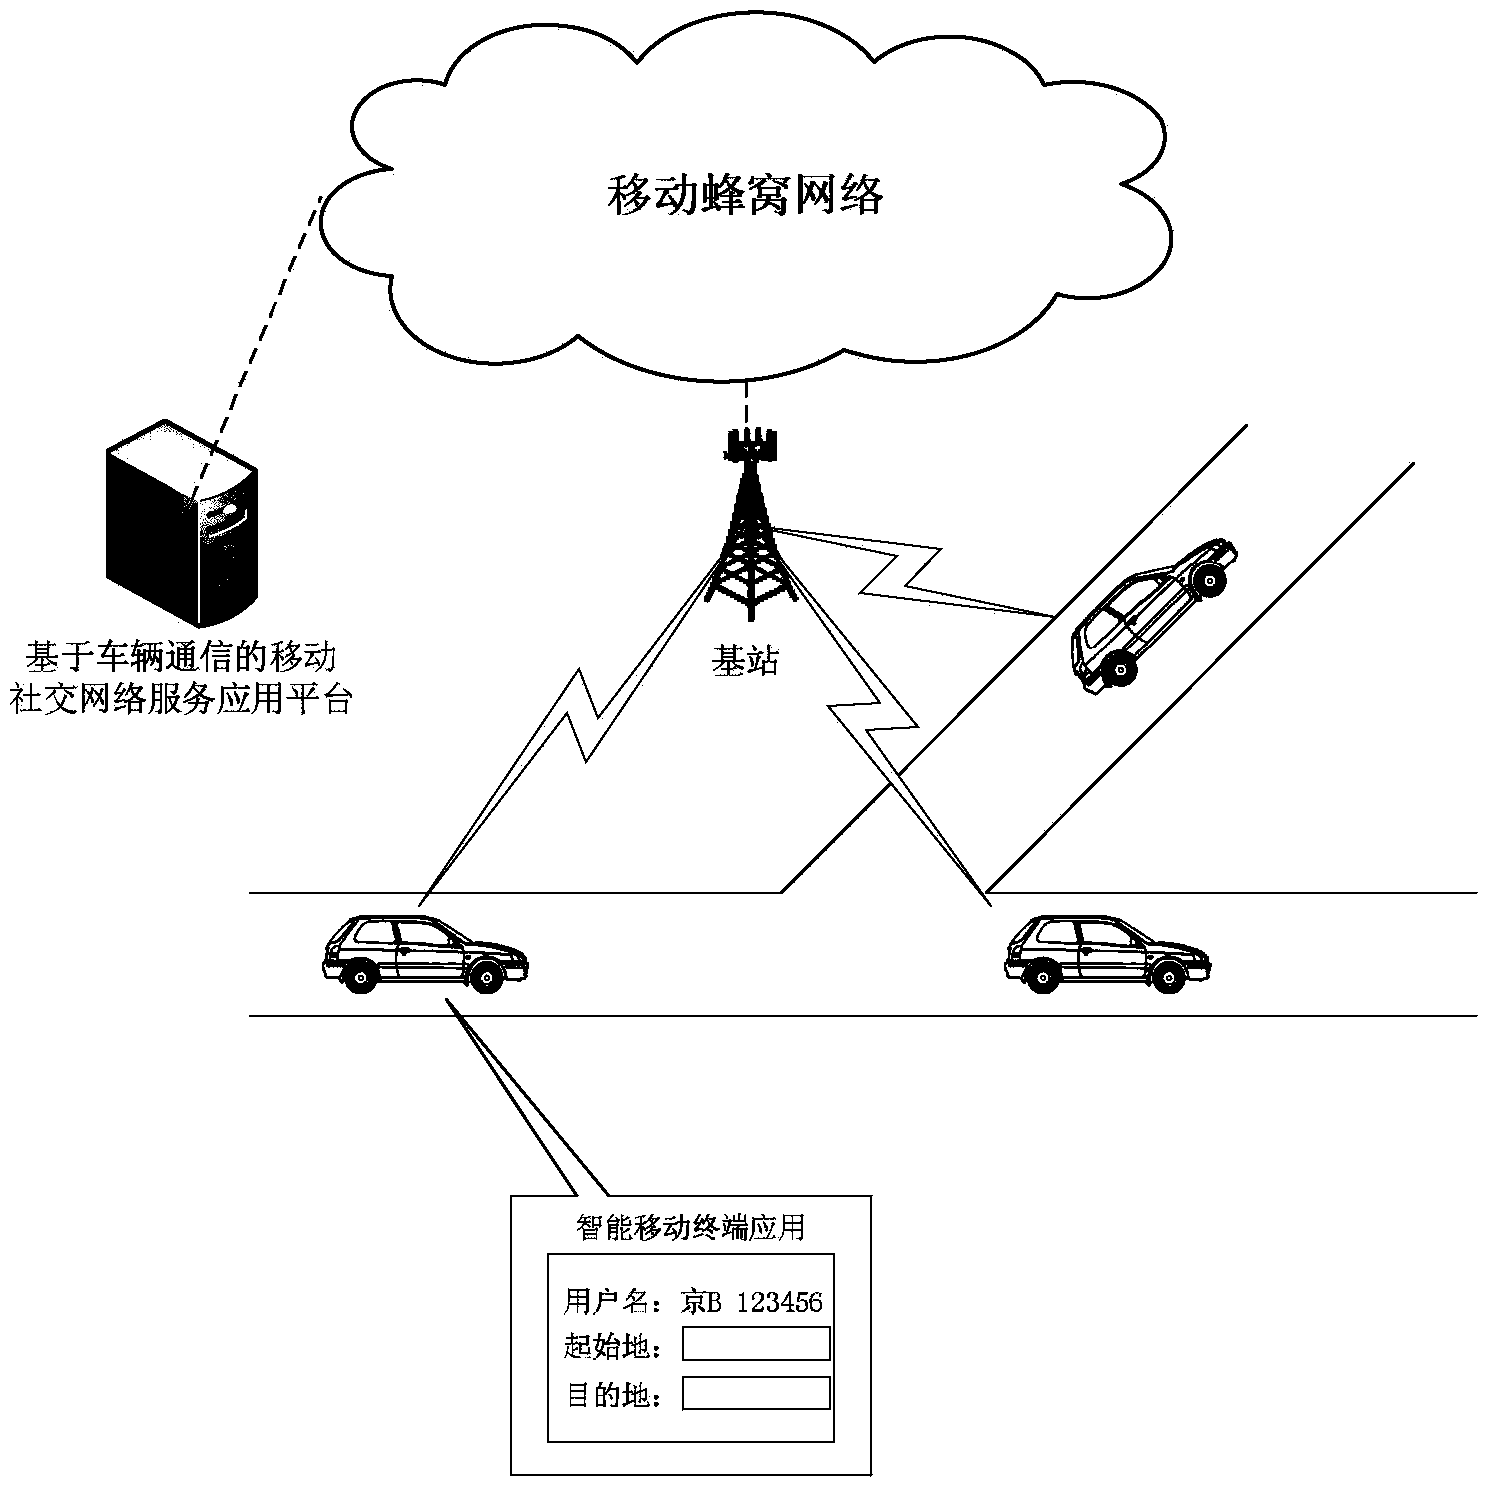 Mobile social network implementation system and method based on vehicle communication